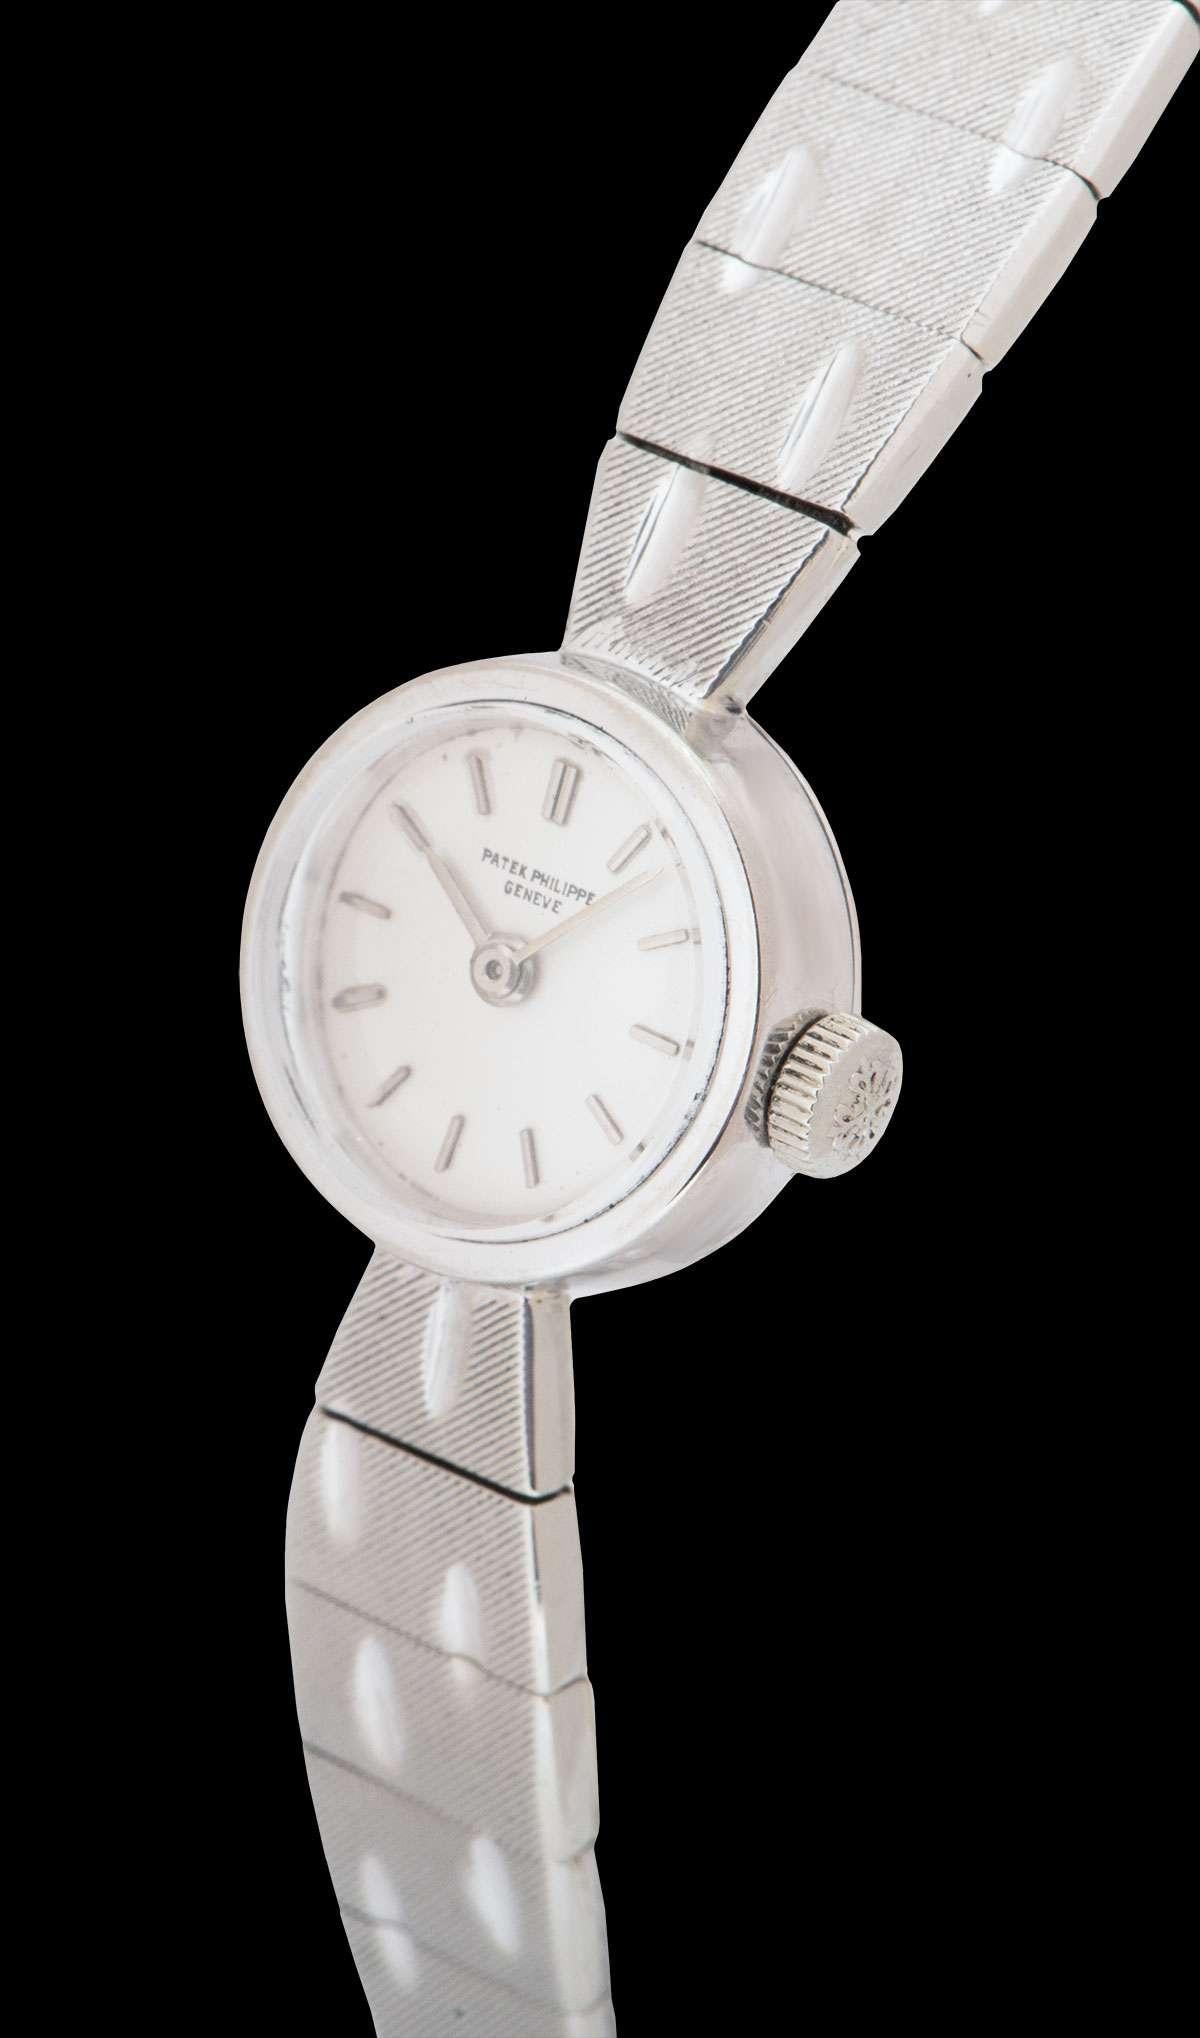 An 18k White Gold Cocktail Vintage 15mm Ladies Wristwatch, silver dial with applied hour markers, a fixed 18k white gold bezel, an 18k white gold bracelet with an 18k white gold jewellery style clasp, sapphire glass, manual wind movement, in